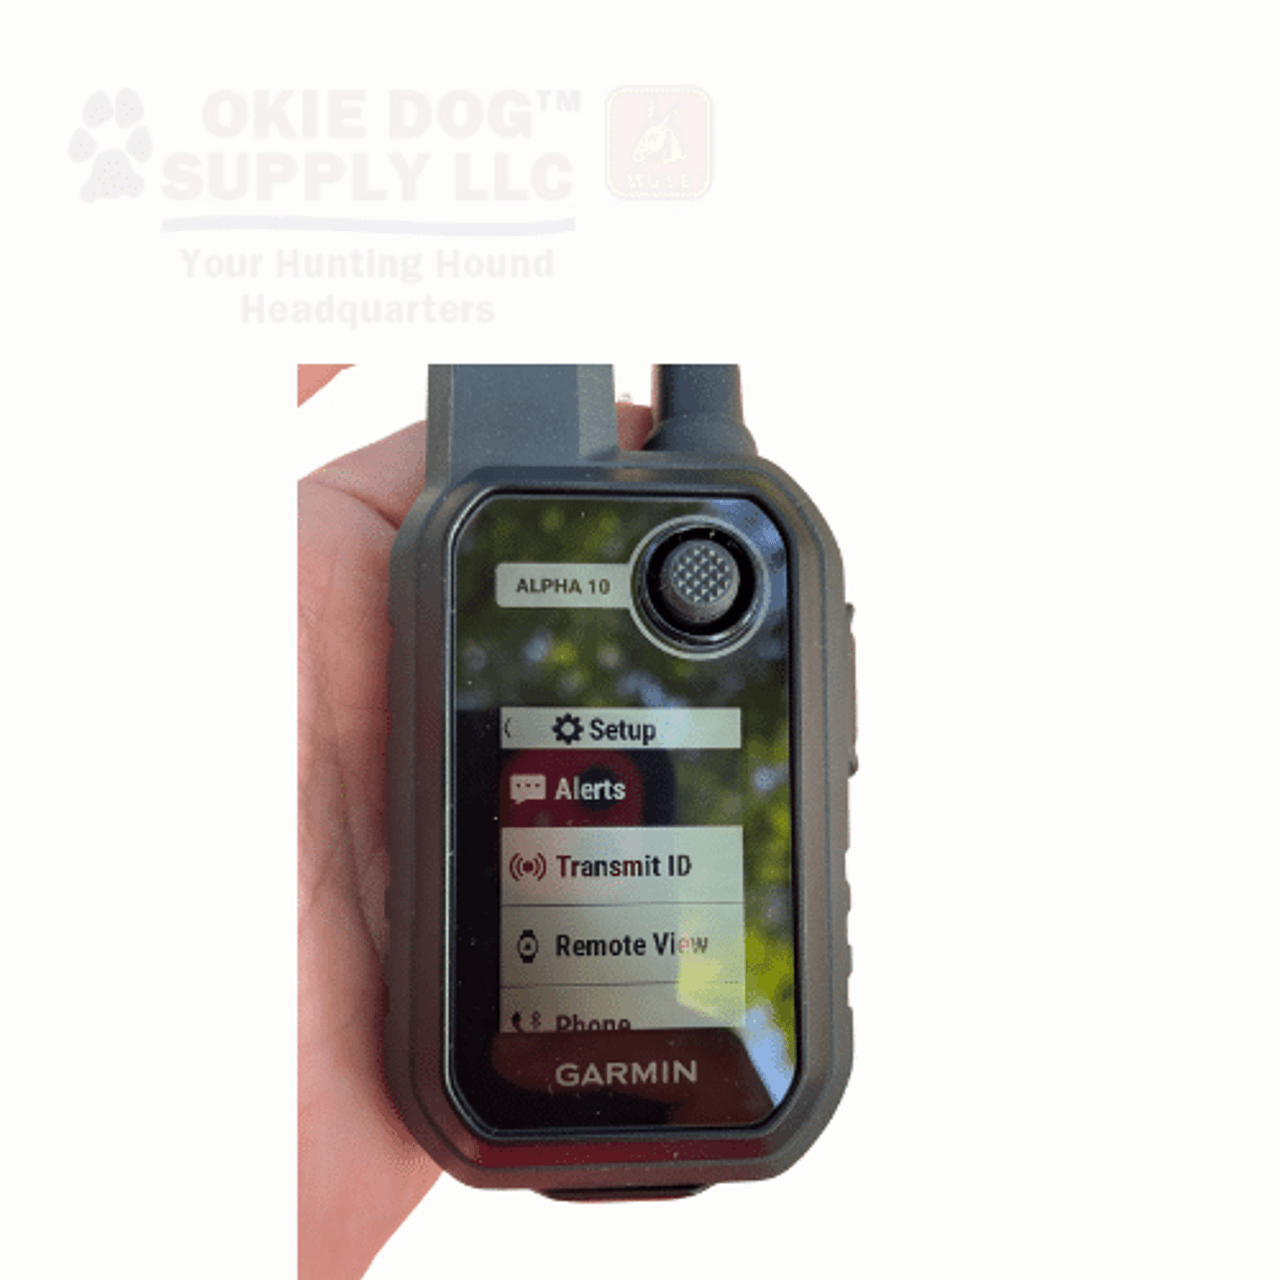 garmin alpha 10 at okie dog supply - connects to your phone, drivetrack, smartwatch - ships free